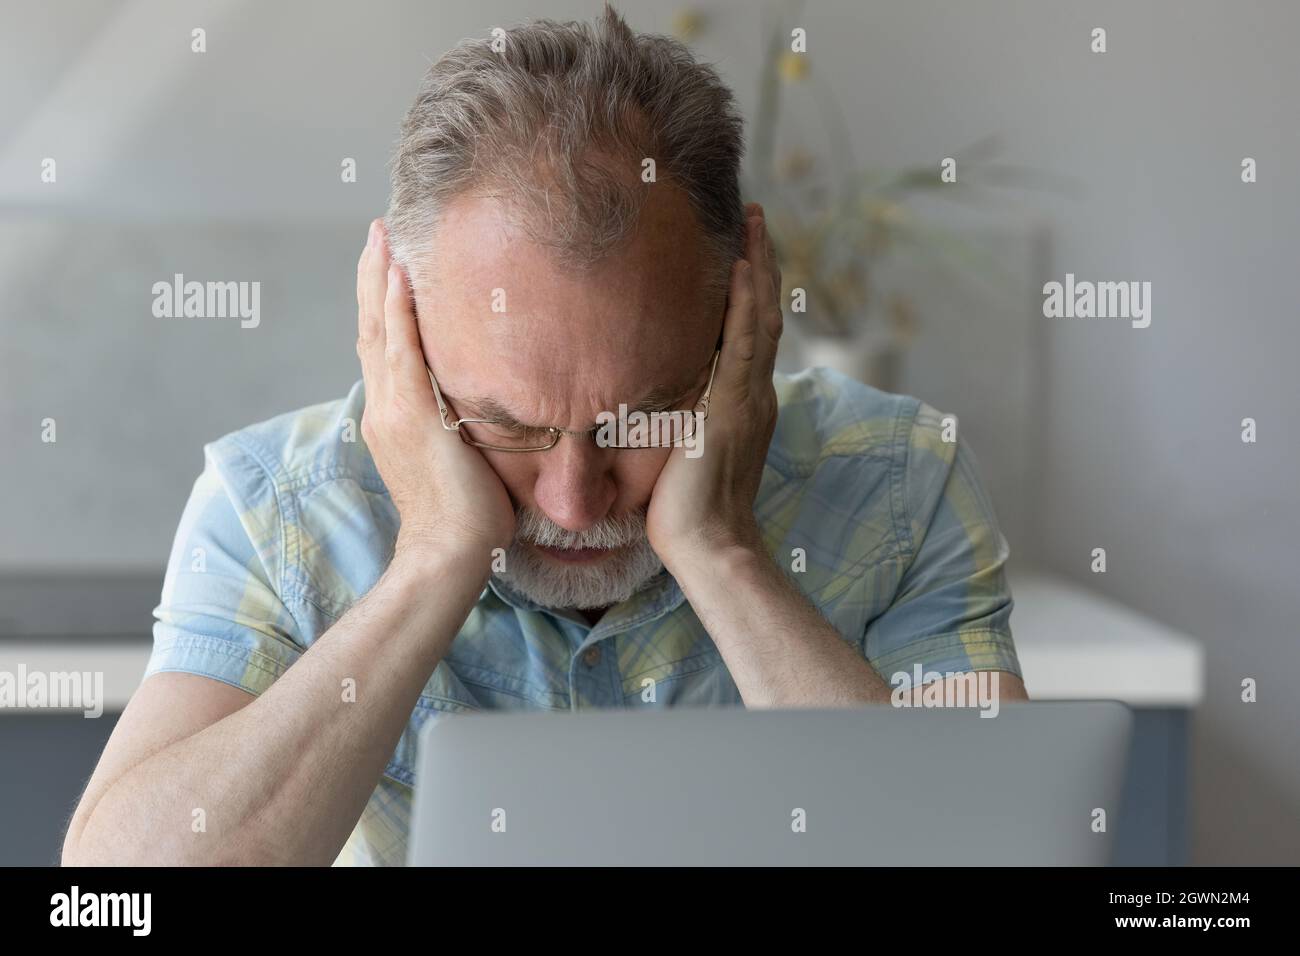 Frustrated middle aged man having problems using computer. Stock Photo